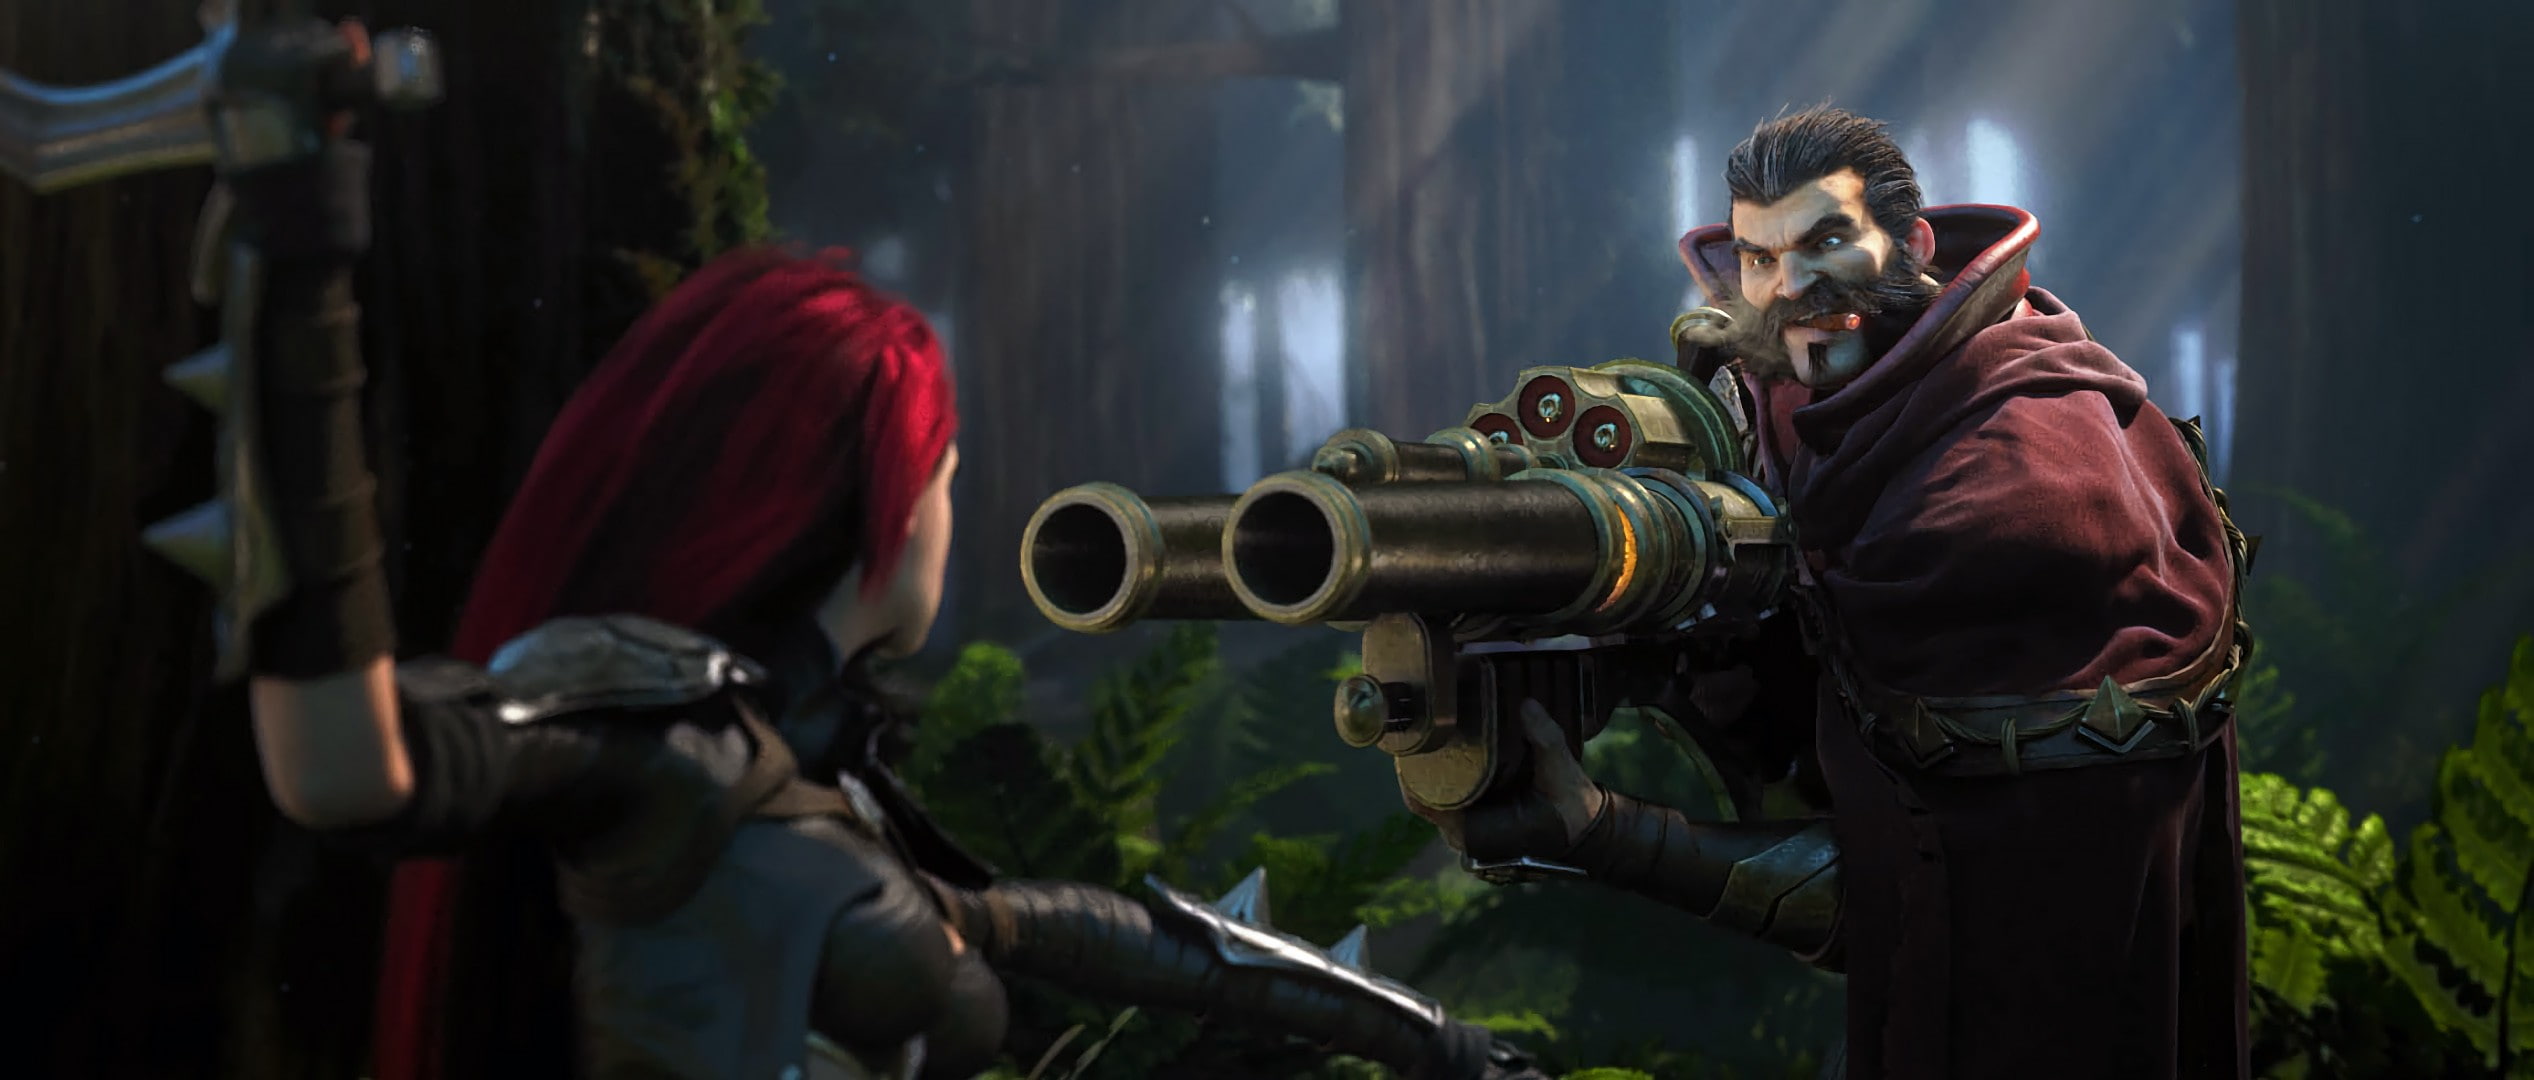 League of Legends, Katarina, Graves, people, weapon, standing